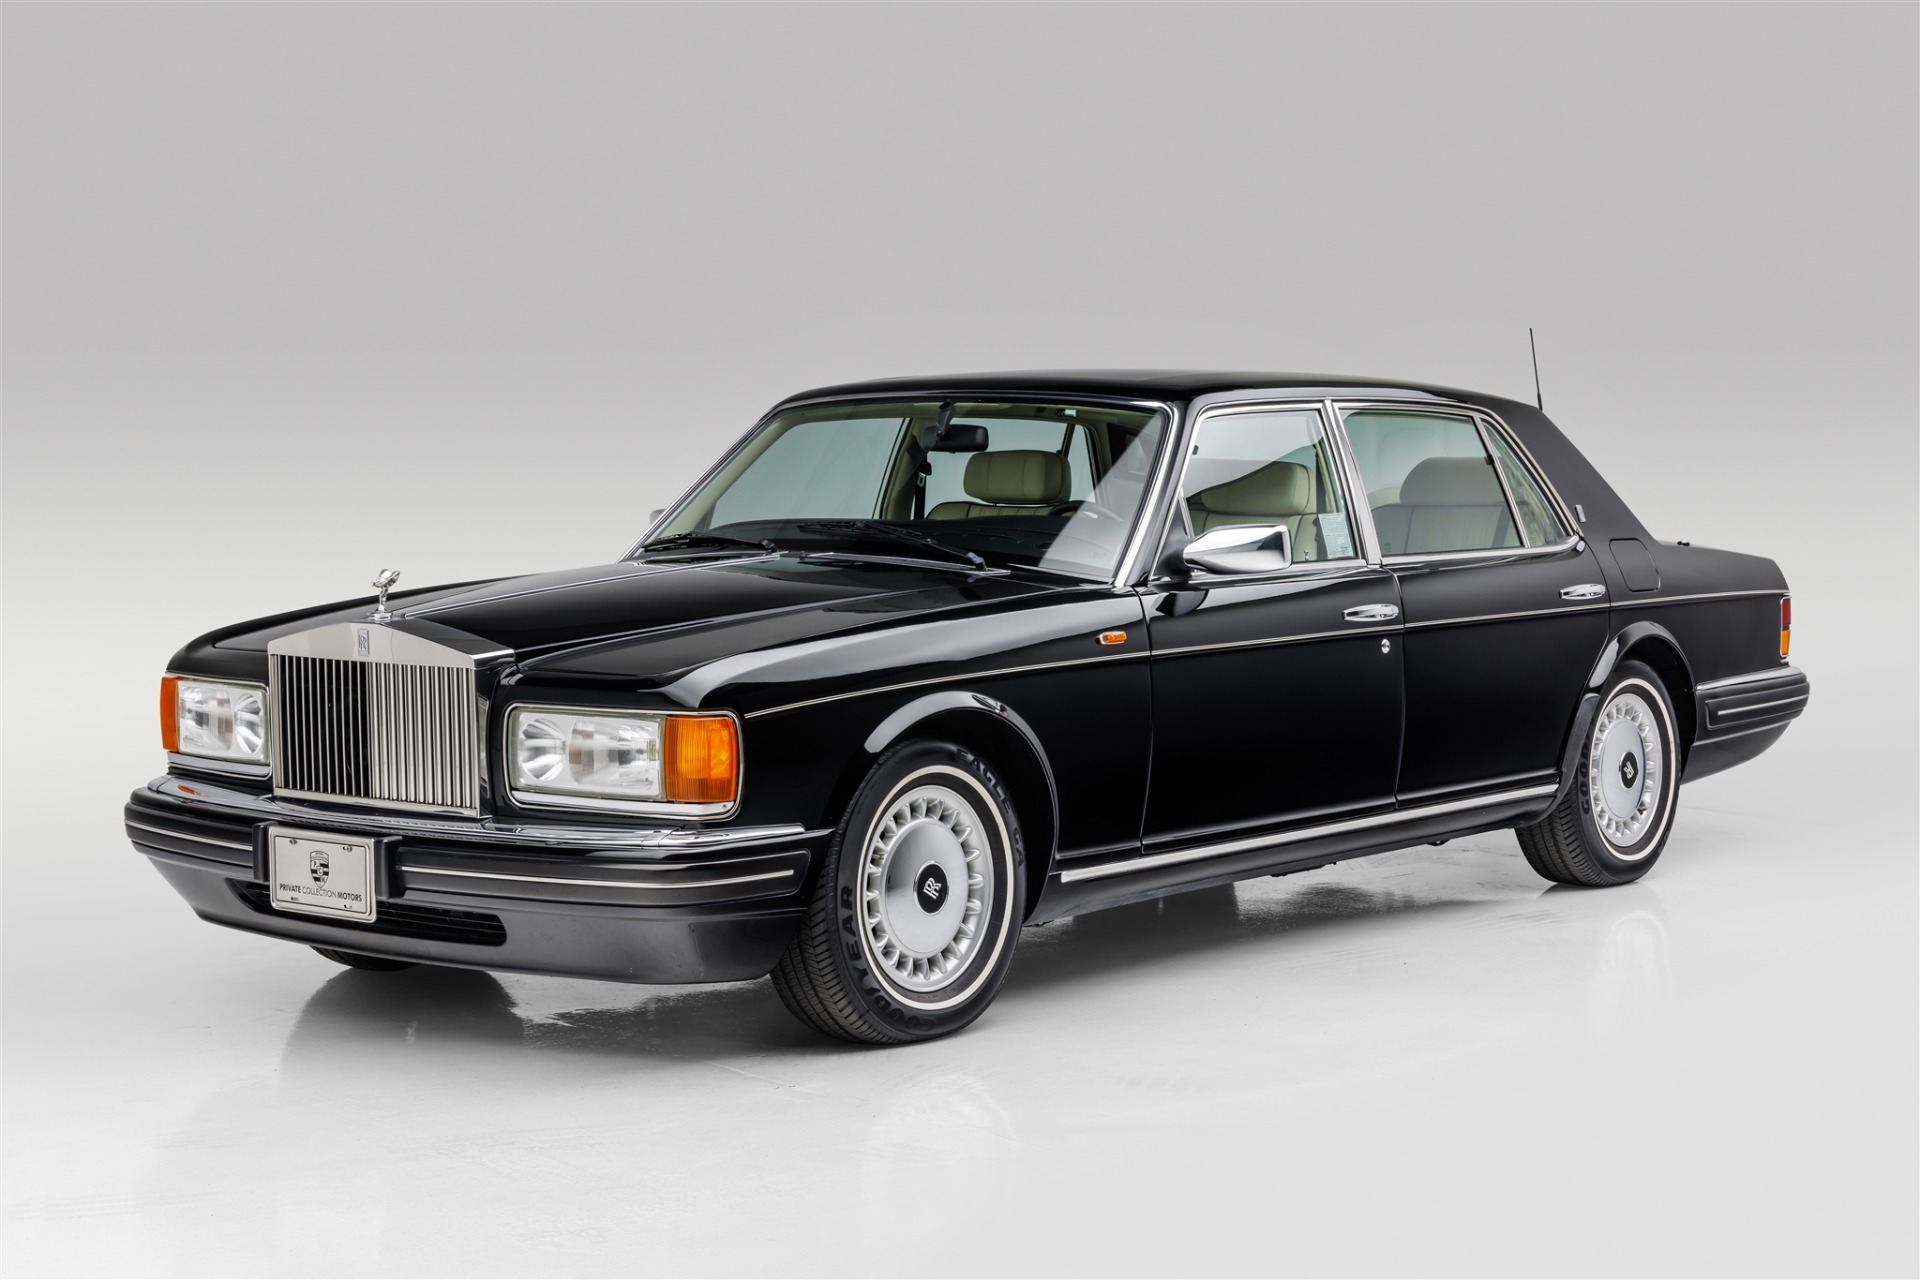 Used 1997 RollsRoyce Silver Spur For Sale Sold  Marshall Goldman  Beverly Hills Stock W21838